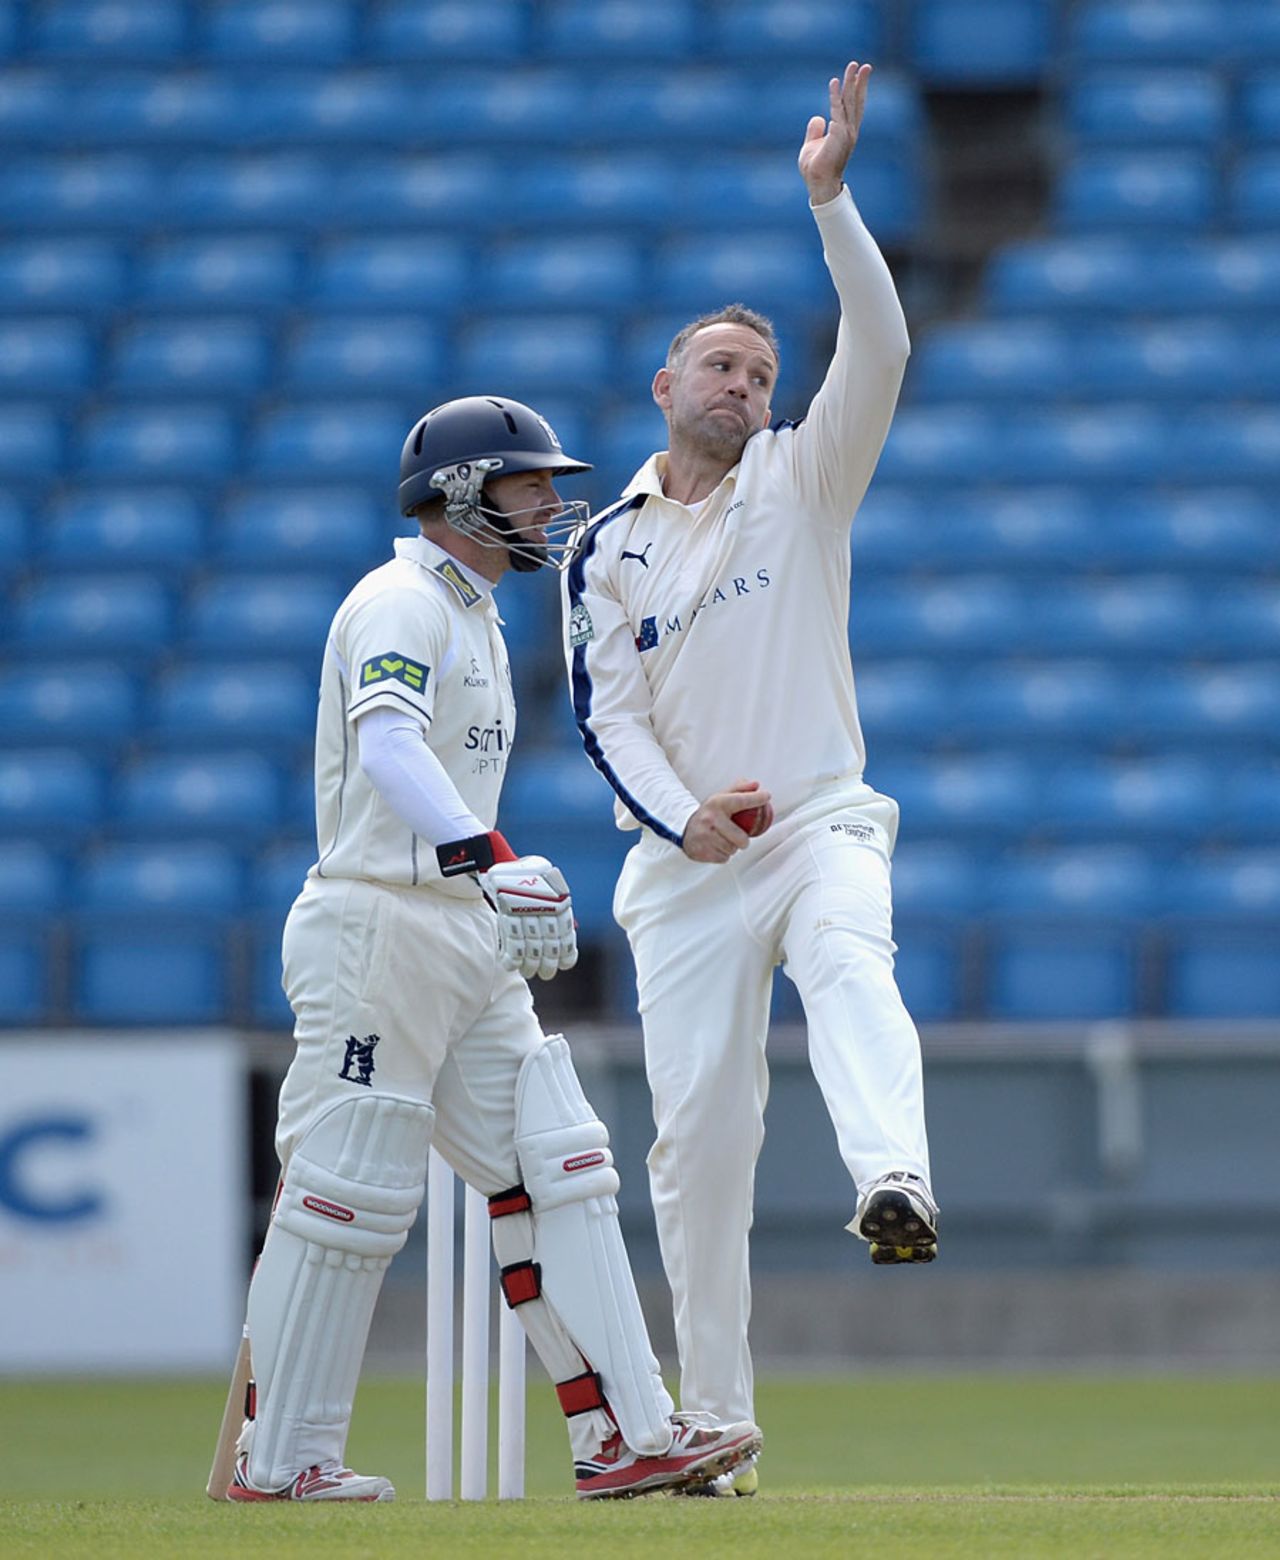 James Middlebrook in action on his return to first-class cricket, Yorkshire v Warwickshire, County Championship Division One, Headingley, 1st day, April 26, 2015